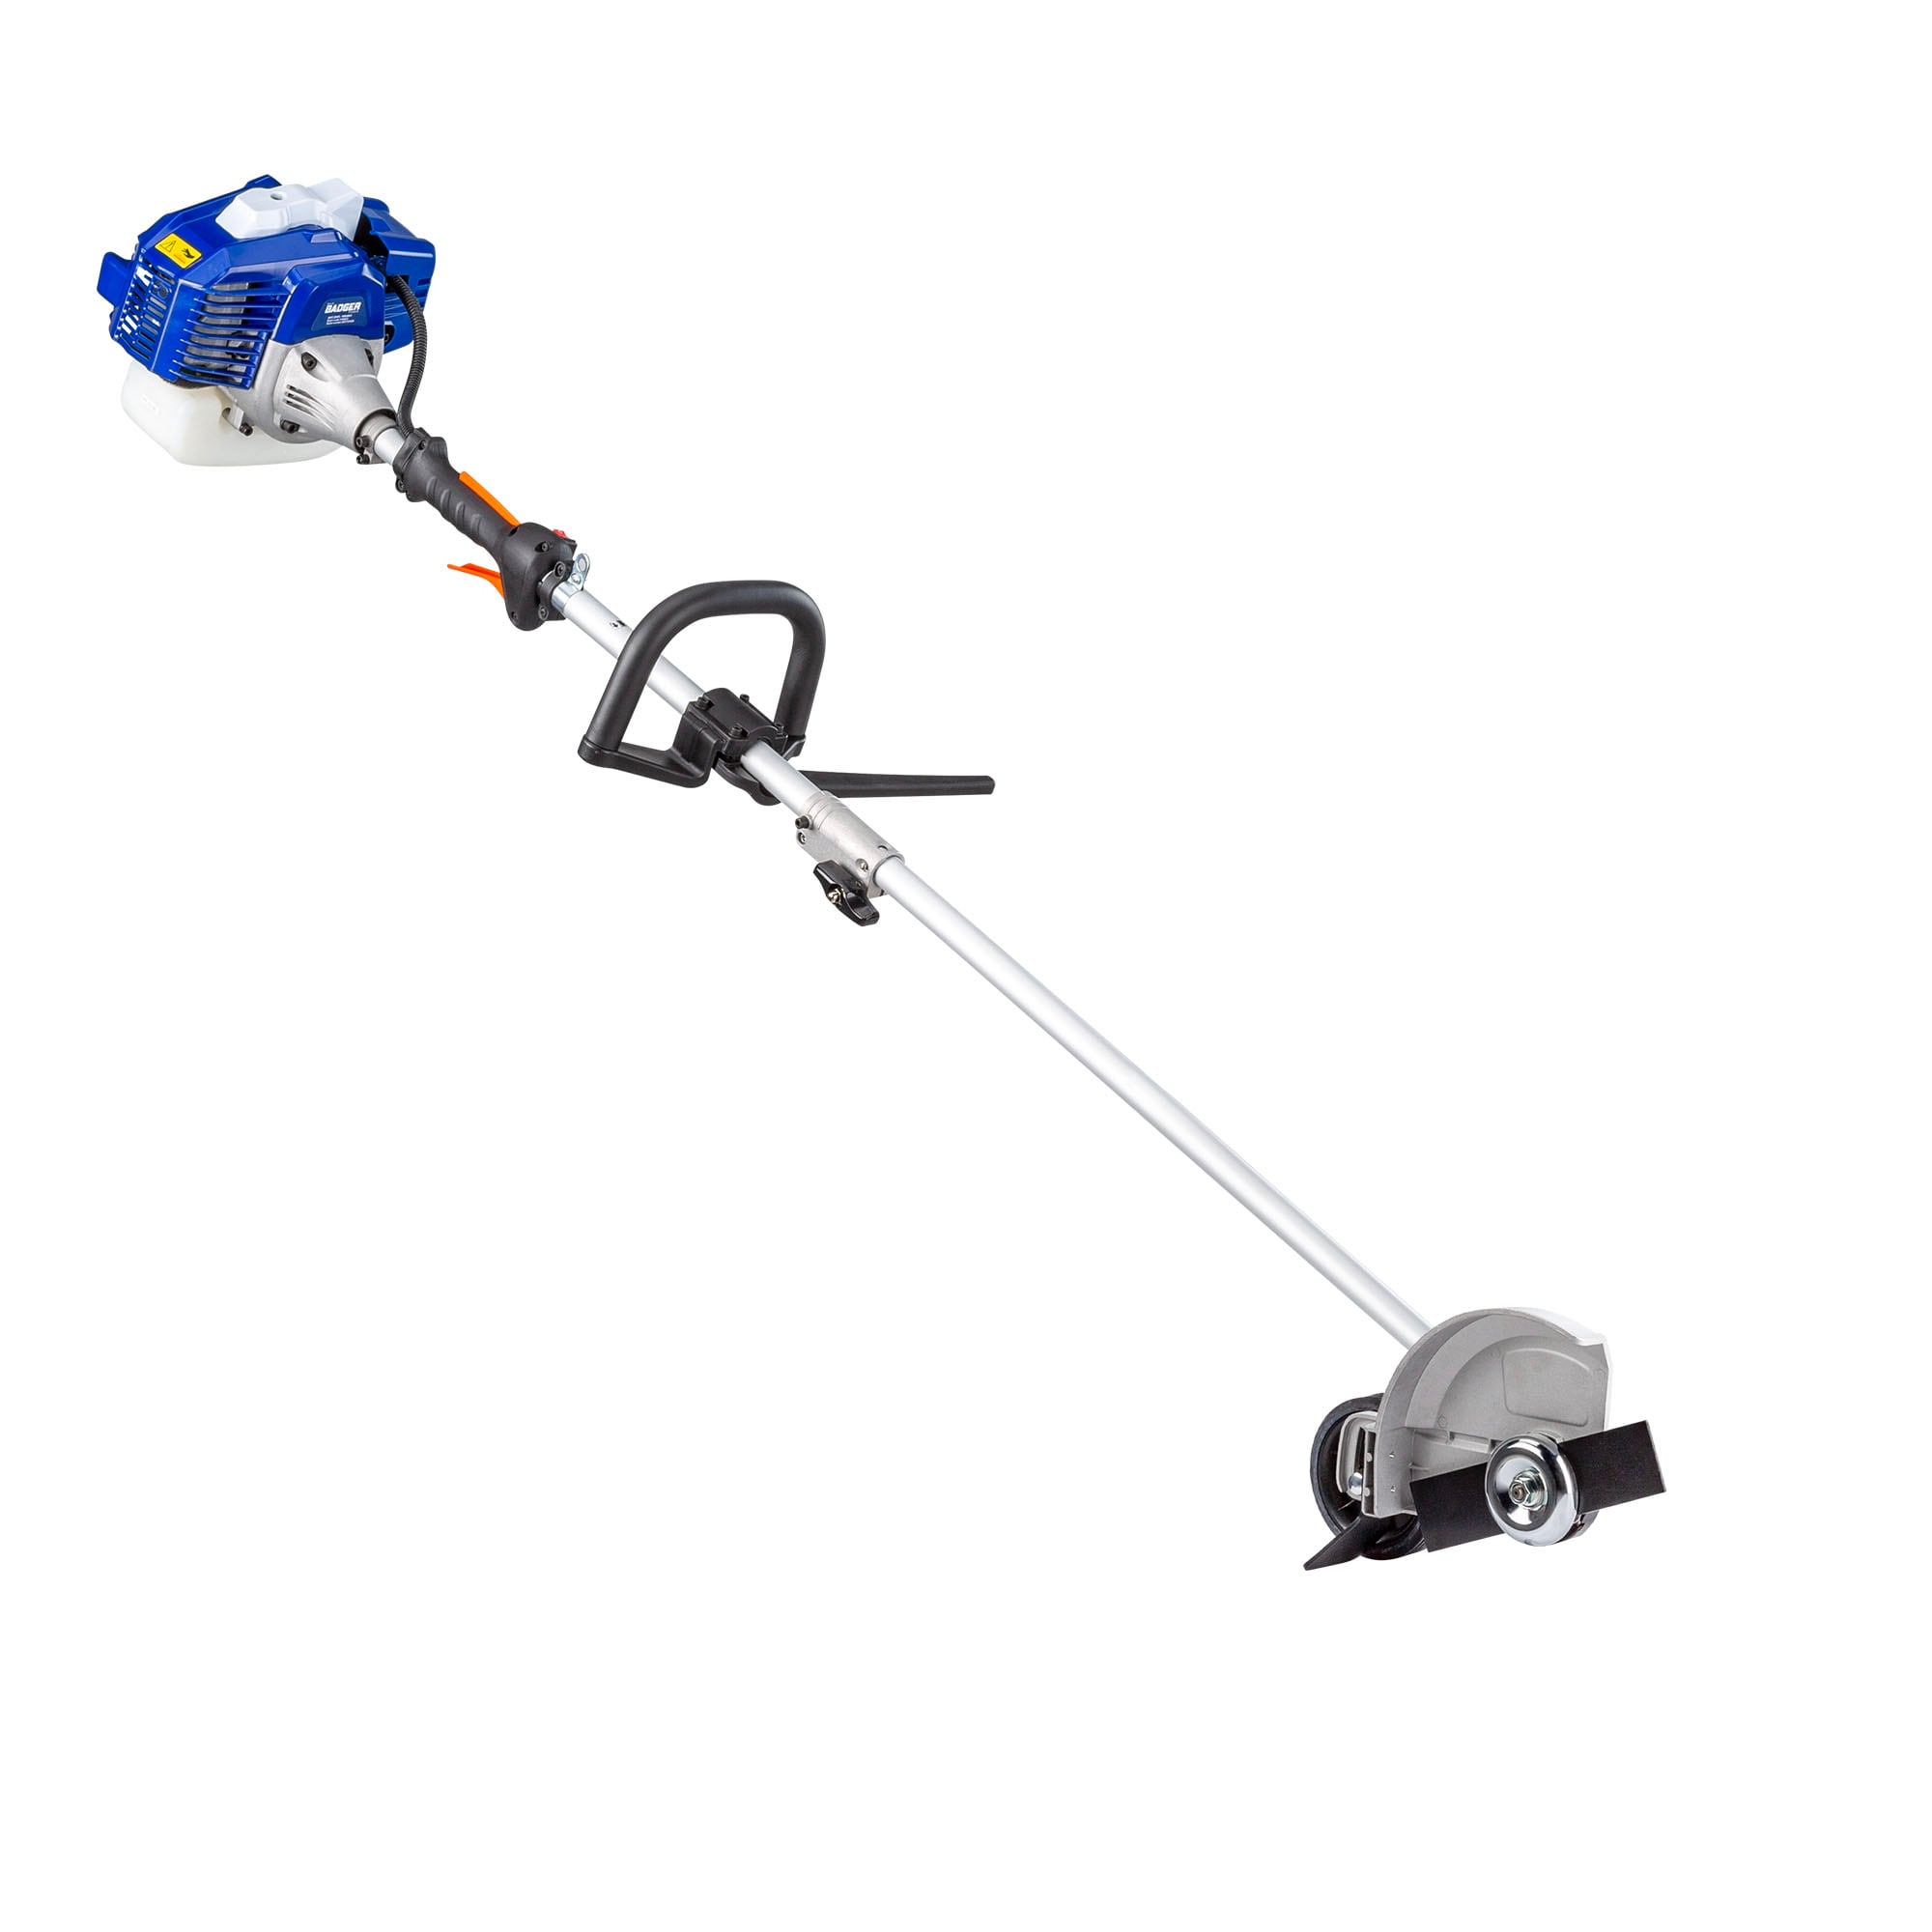 Wild Badger Power String Trimmer Attachments at